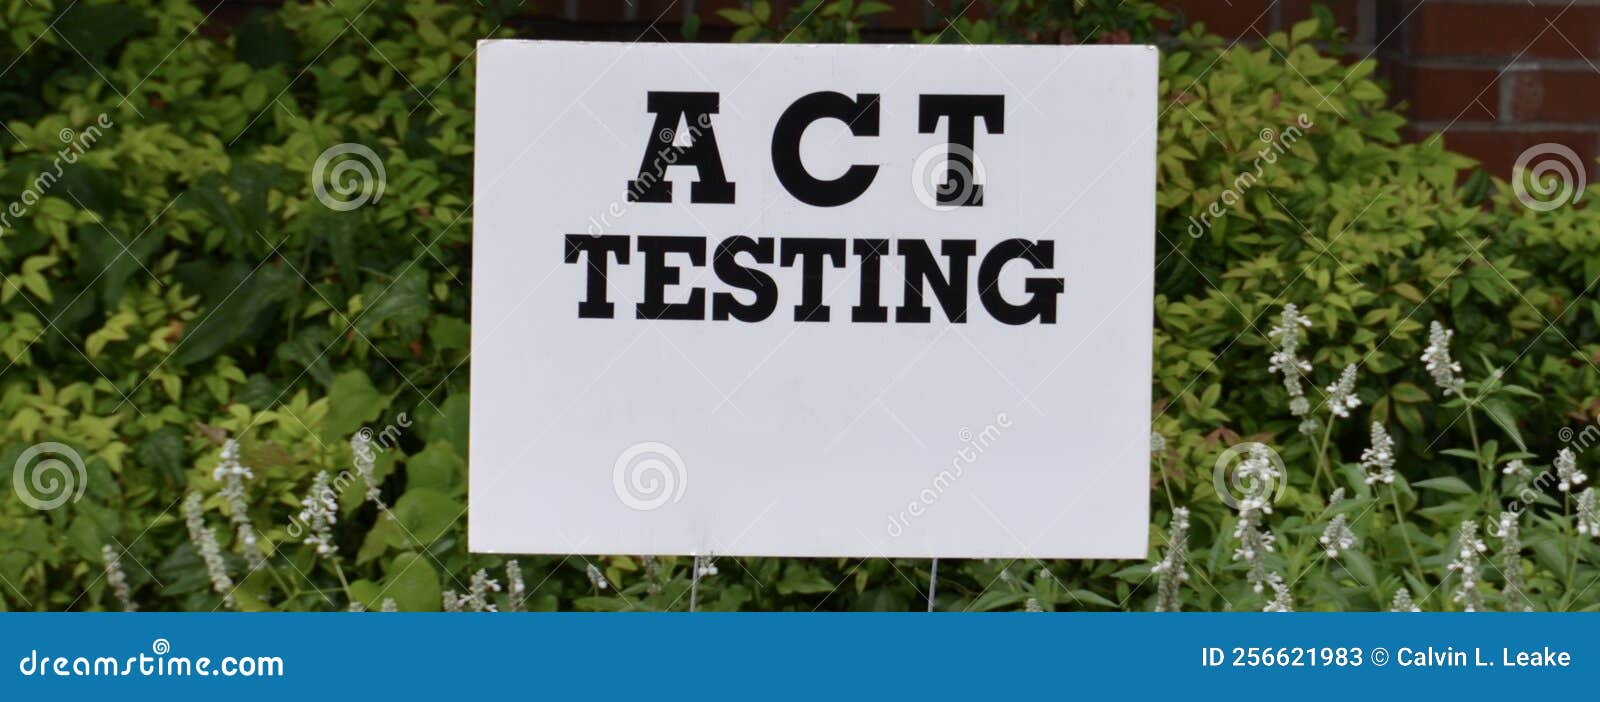 act american college testing